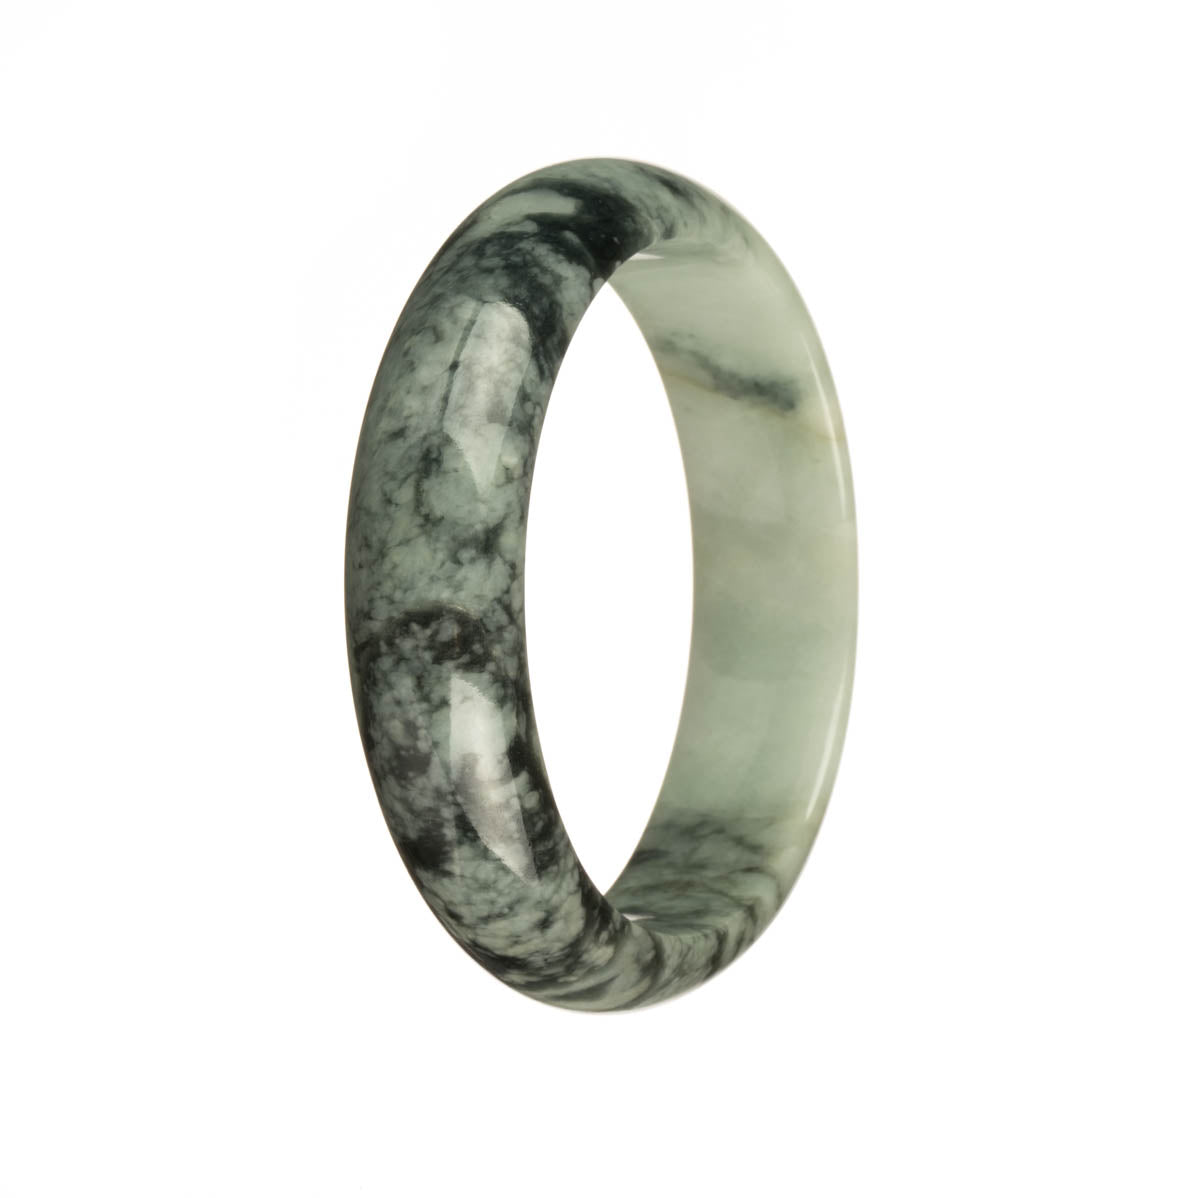 A close-up image of a pale green jade bangle bracelet with a dark green pattern. The bracelet has a half-moon shape and is 54mm in size. The jade is certified Grade A quality.